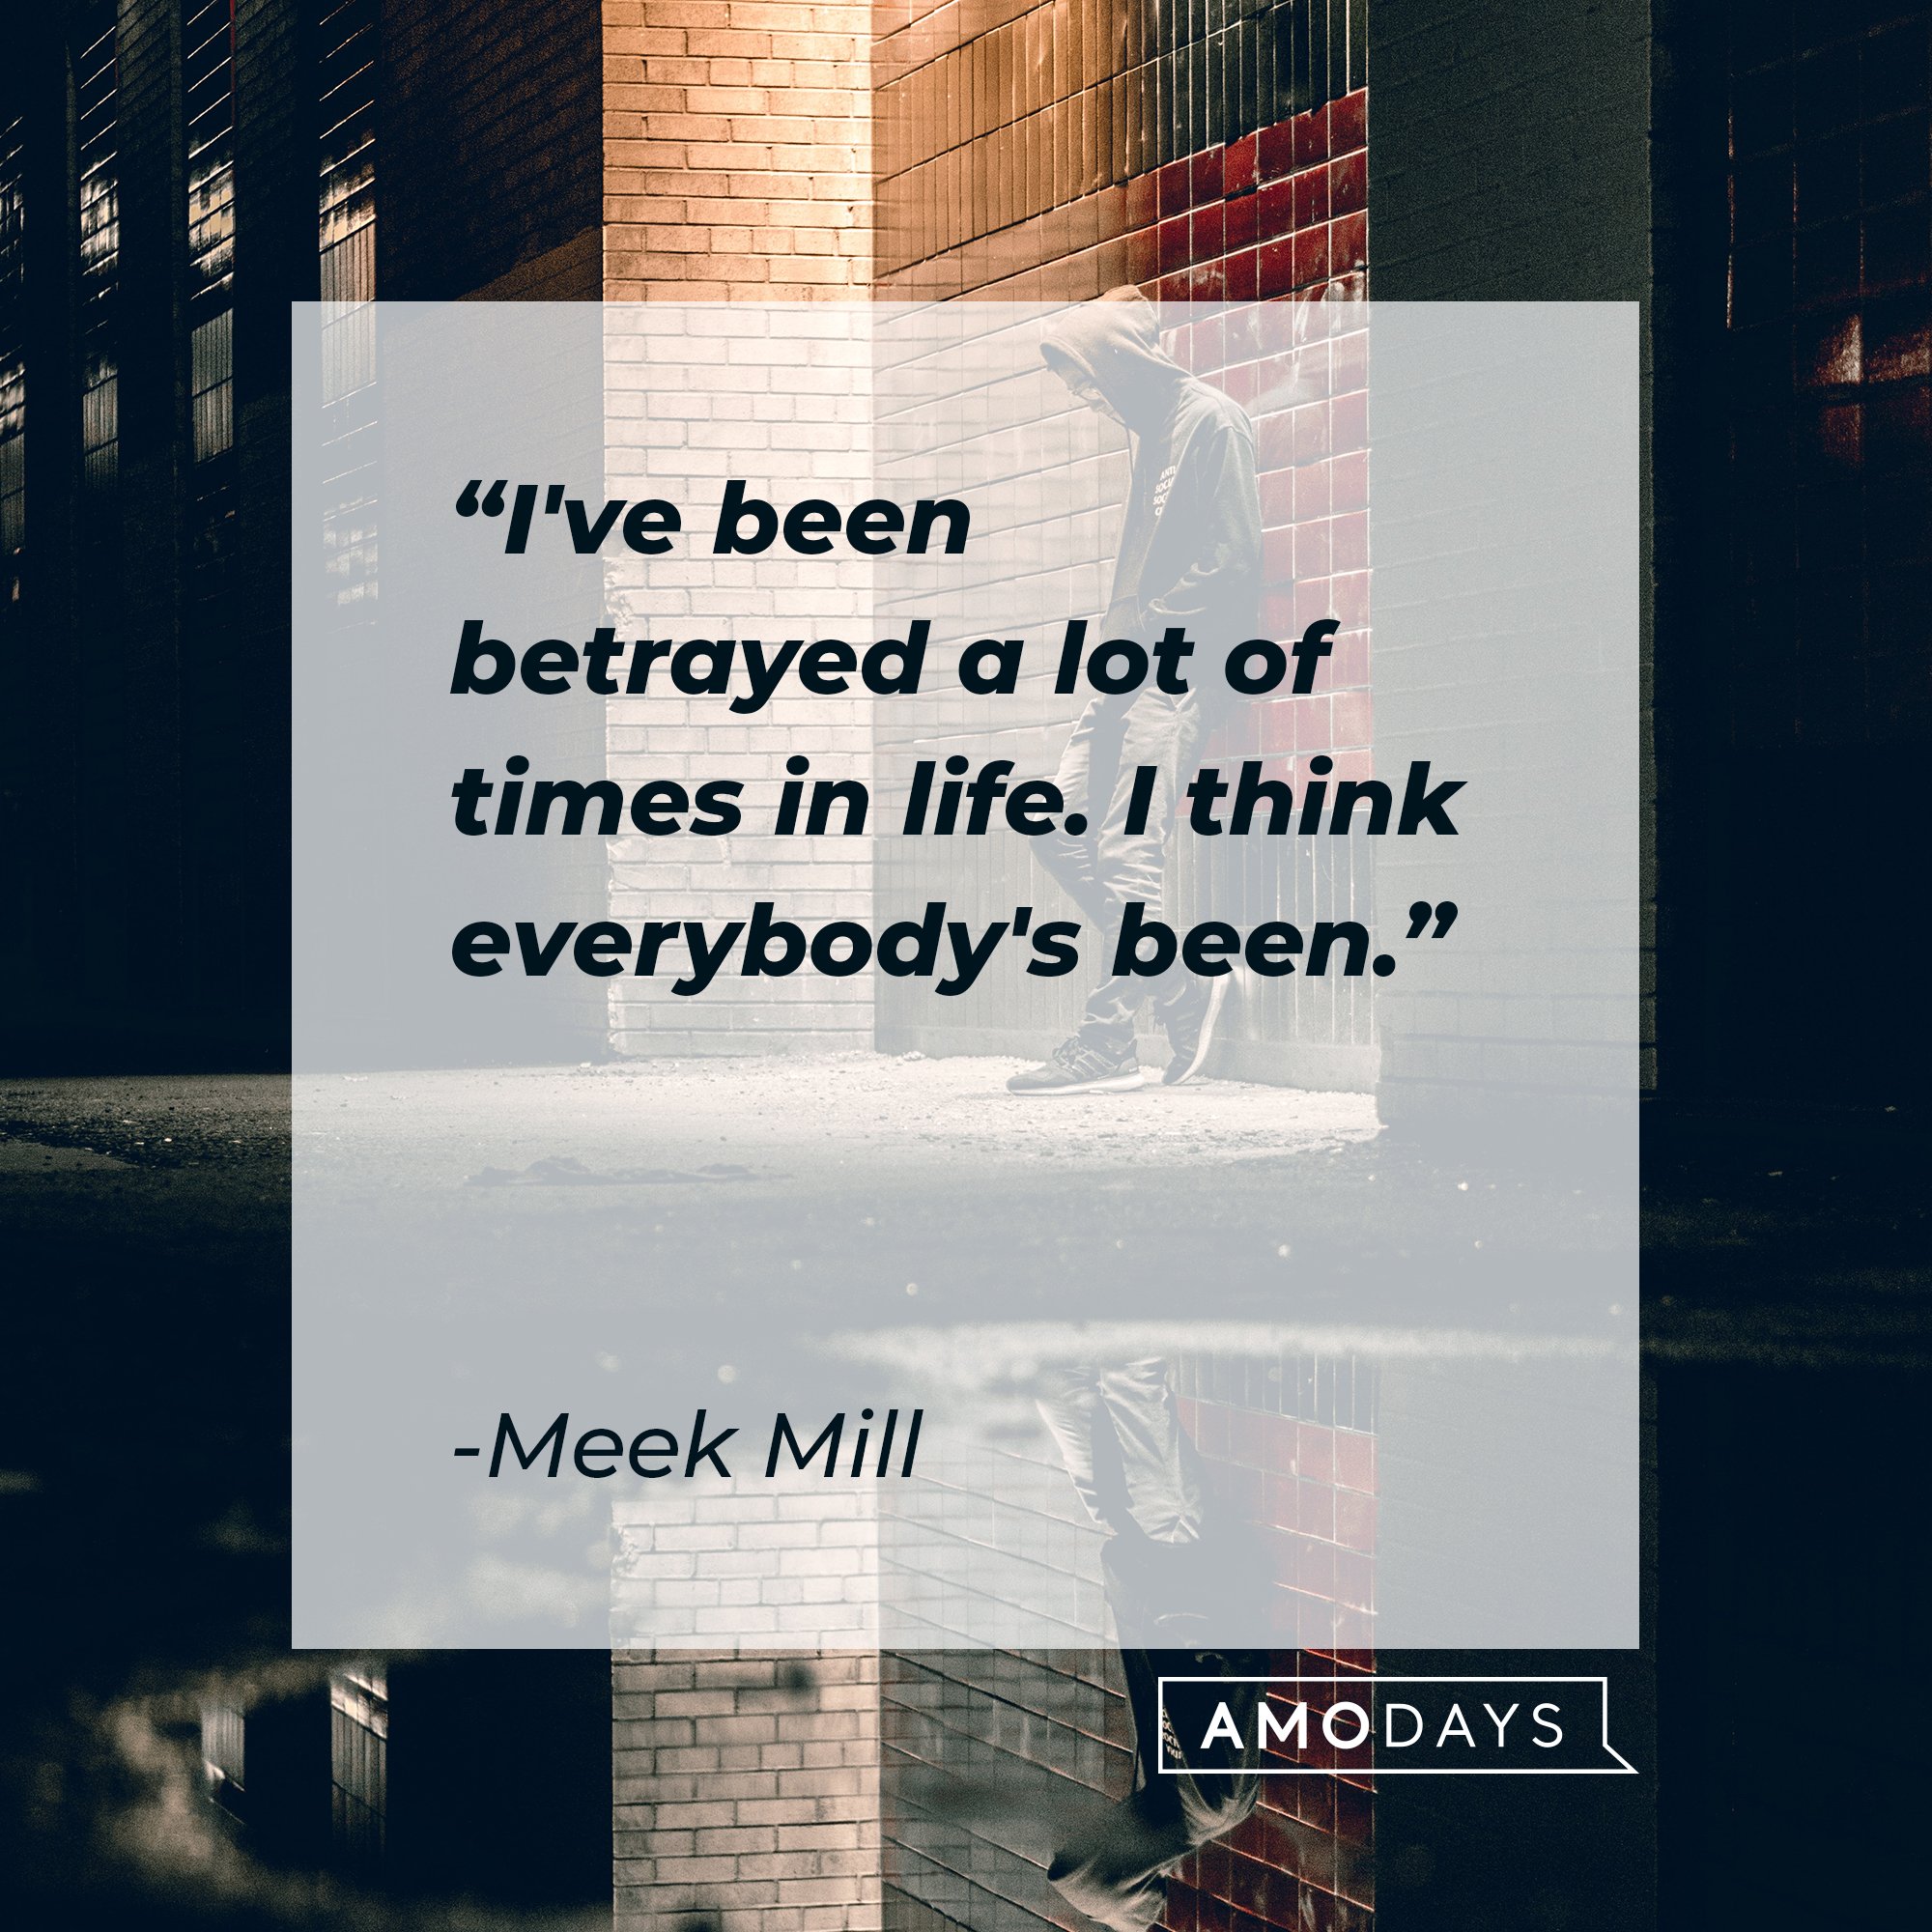 Meek Mill’s quote: "I've been betrayed a lot of times in life. I think everybody's been." | Image: AmoDays 